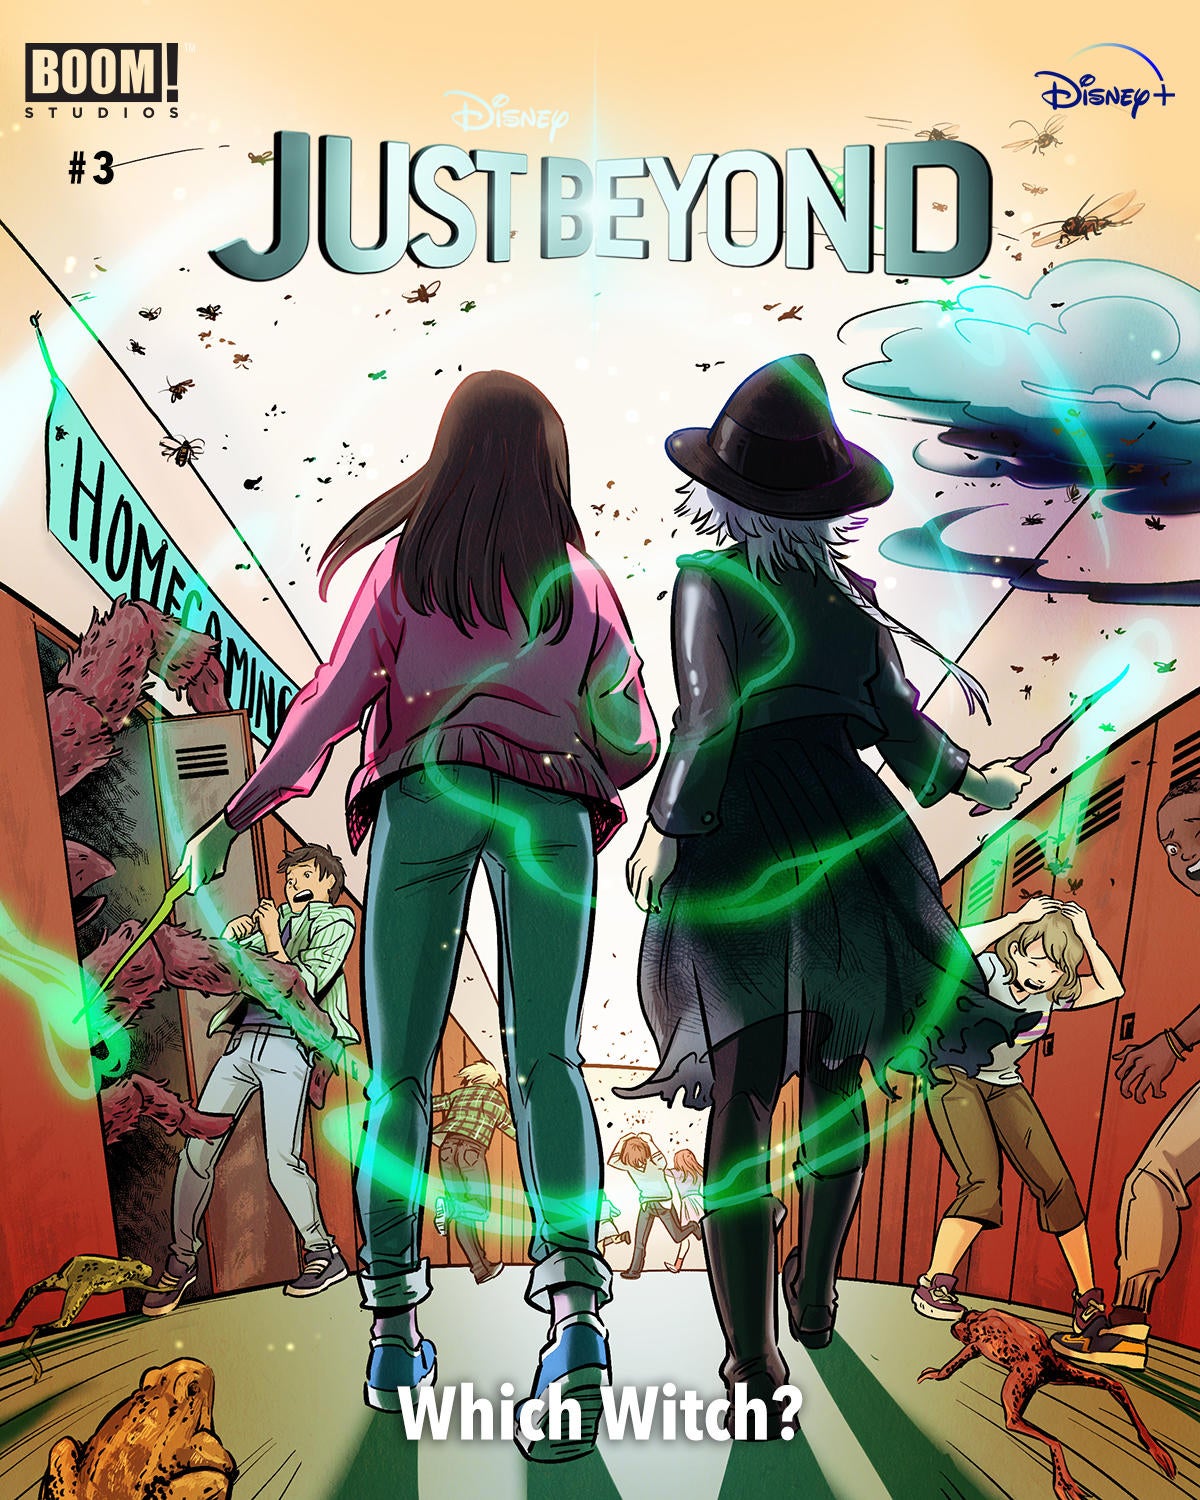 ep3-justbeyond-whichwitch-irene-flores.jpg